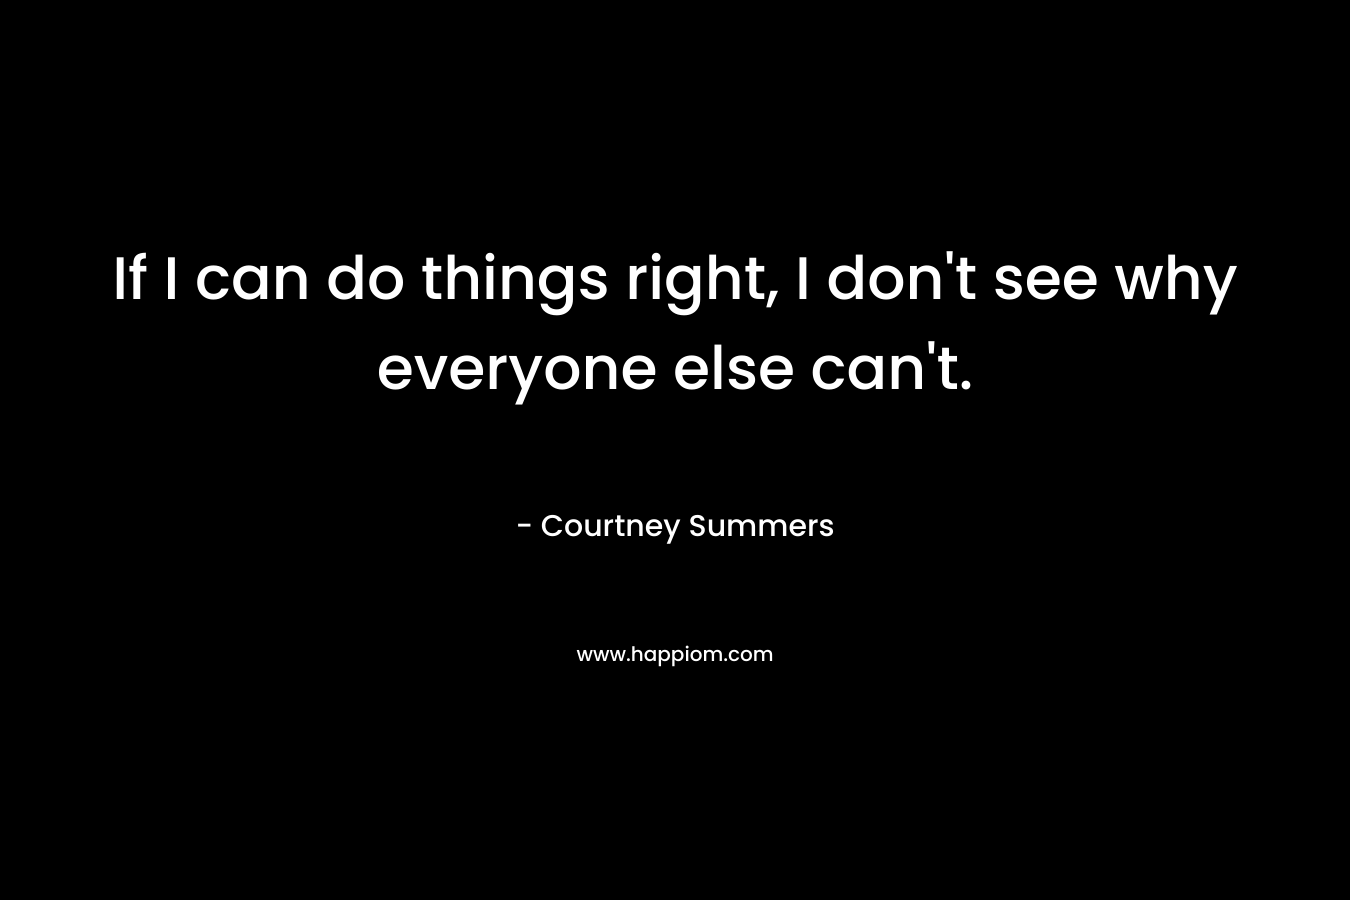 If I can do things right, I don’t see why everyone else can’t. – Courtney Summers